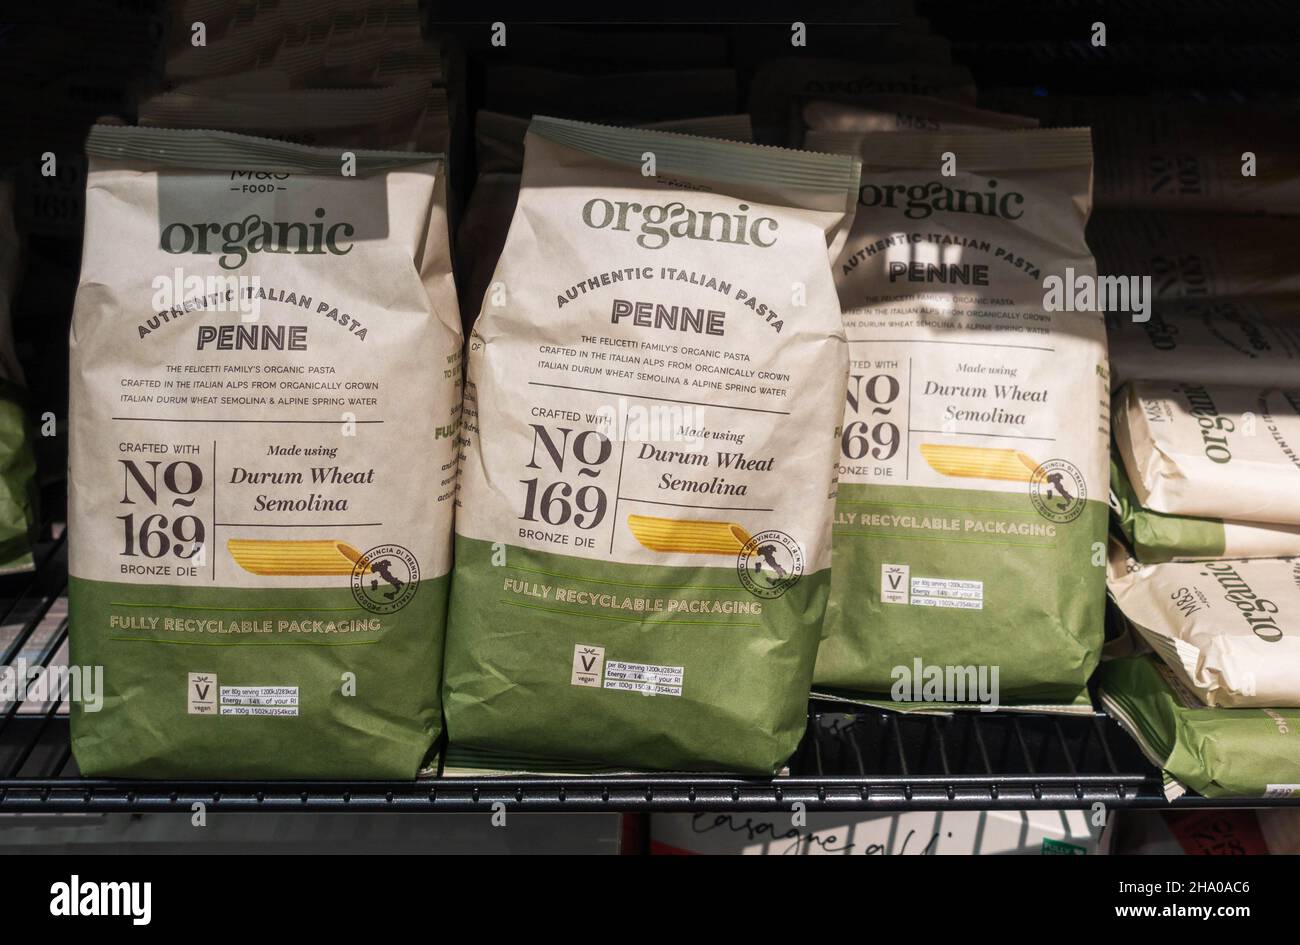 Bags of organic penne pasta on a. shelf in M&S foodhall Stock Photo